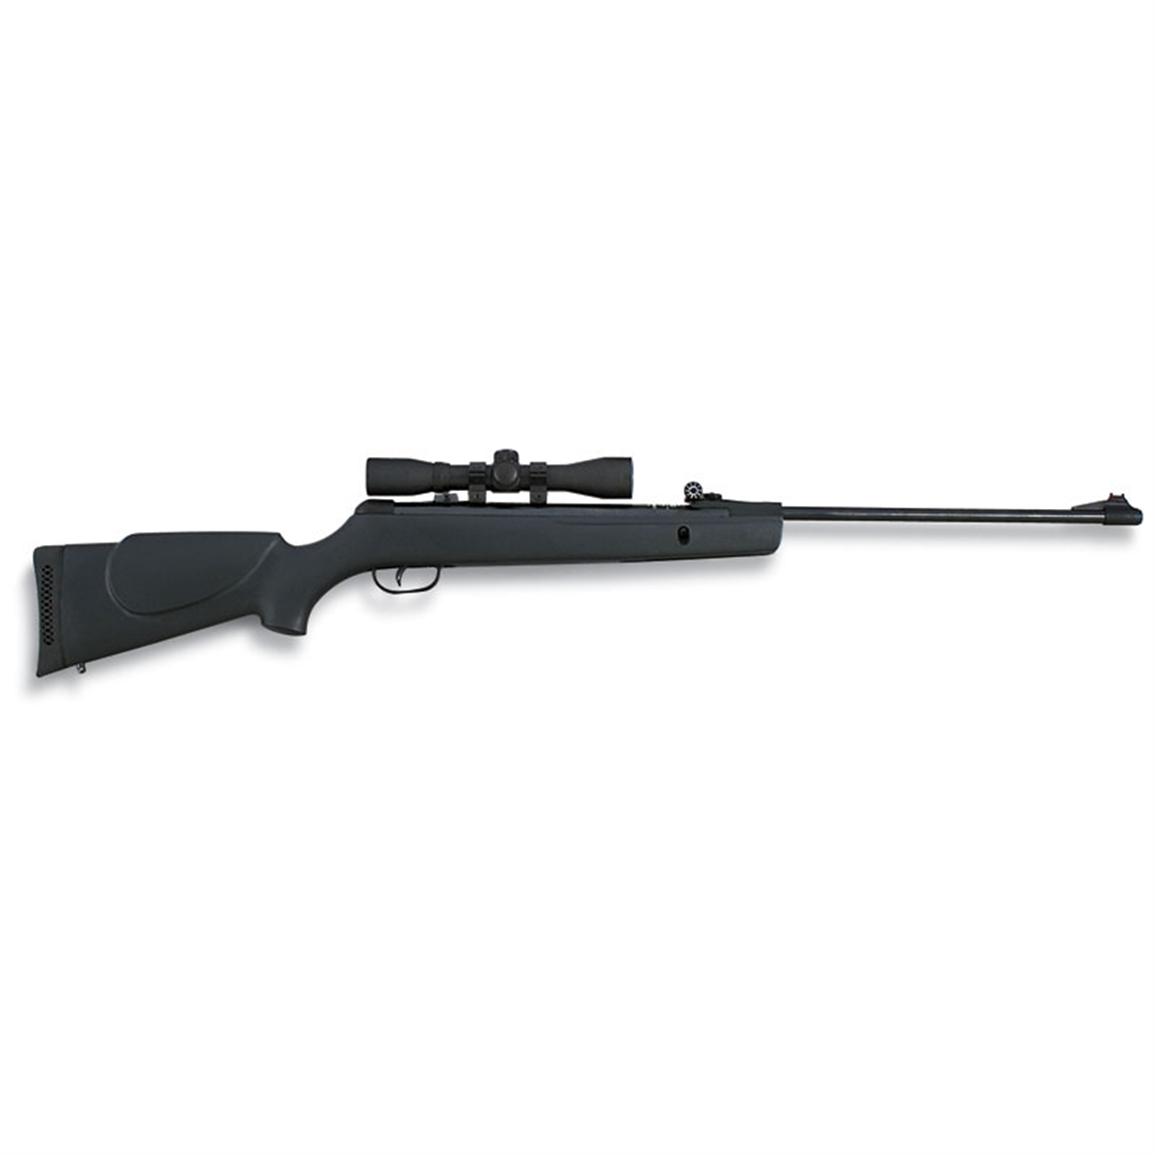  Gamo   Shadow 1000 Pellet  Rifle  with Scope 124330 Air 